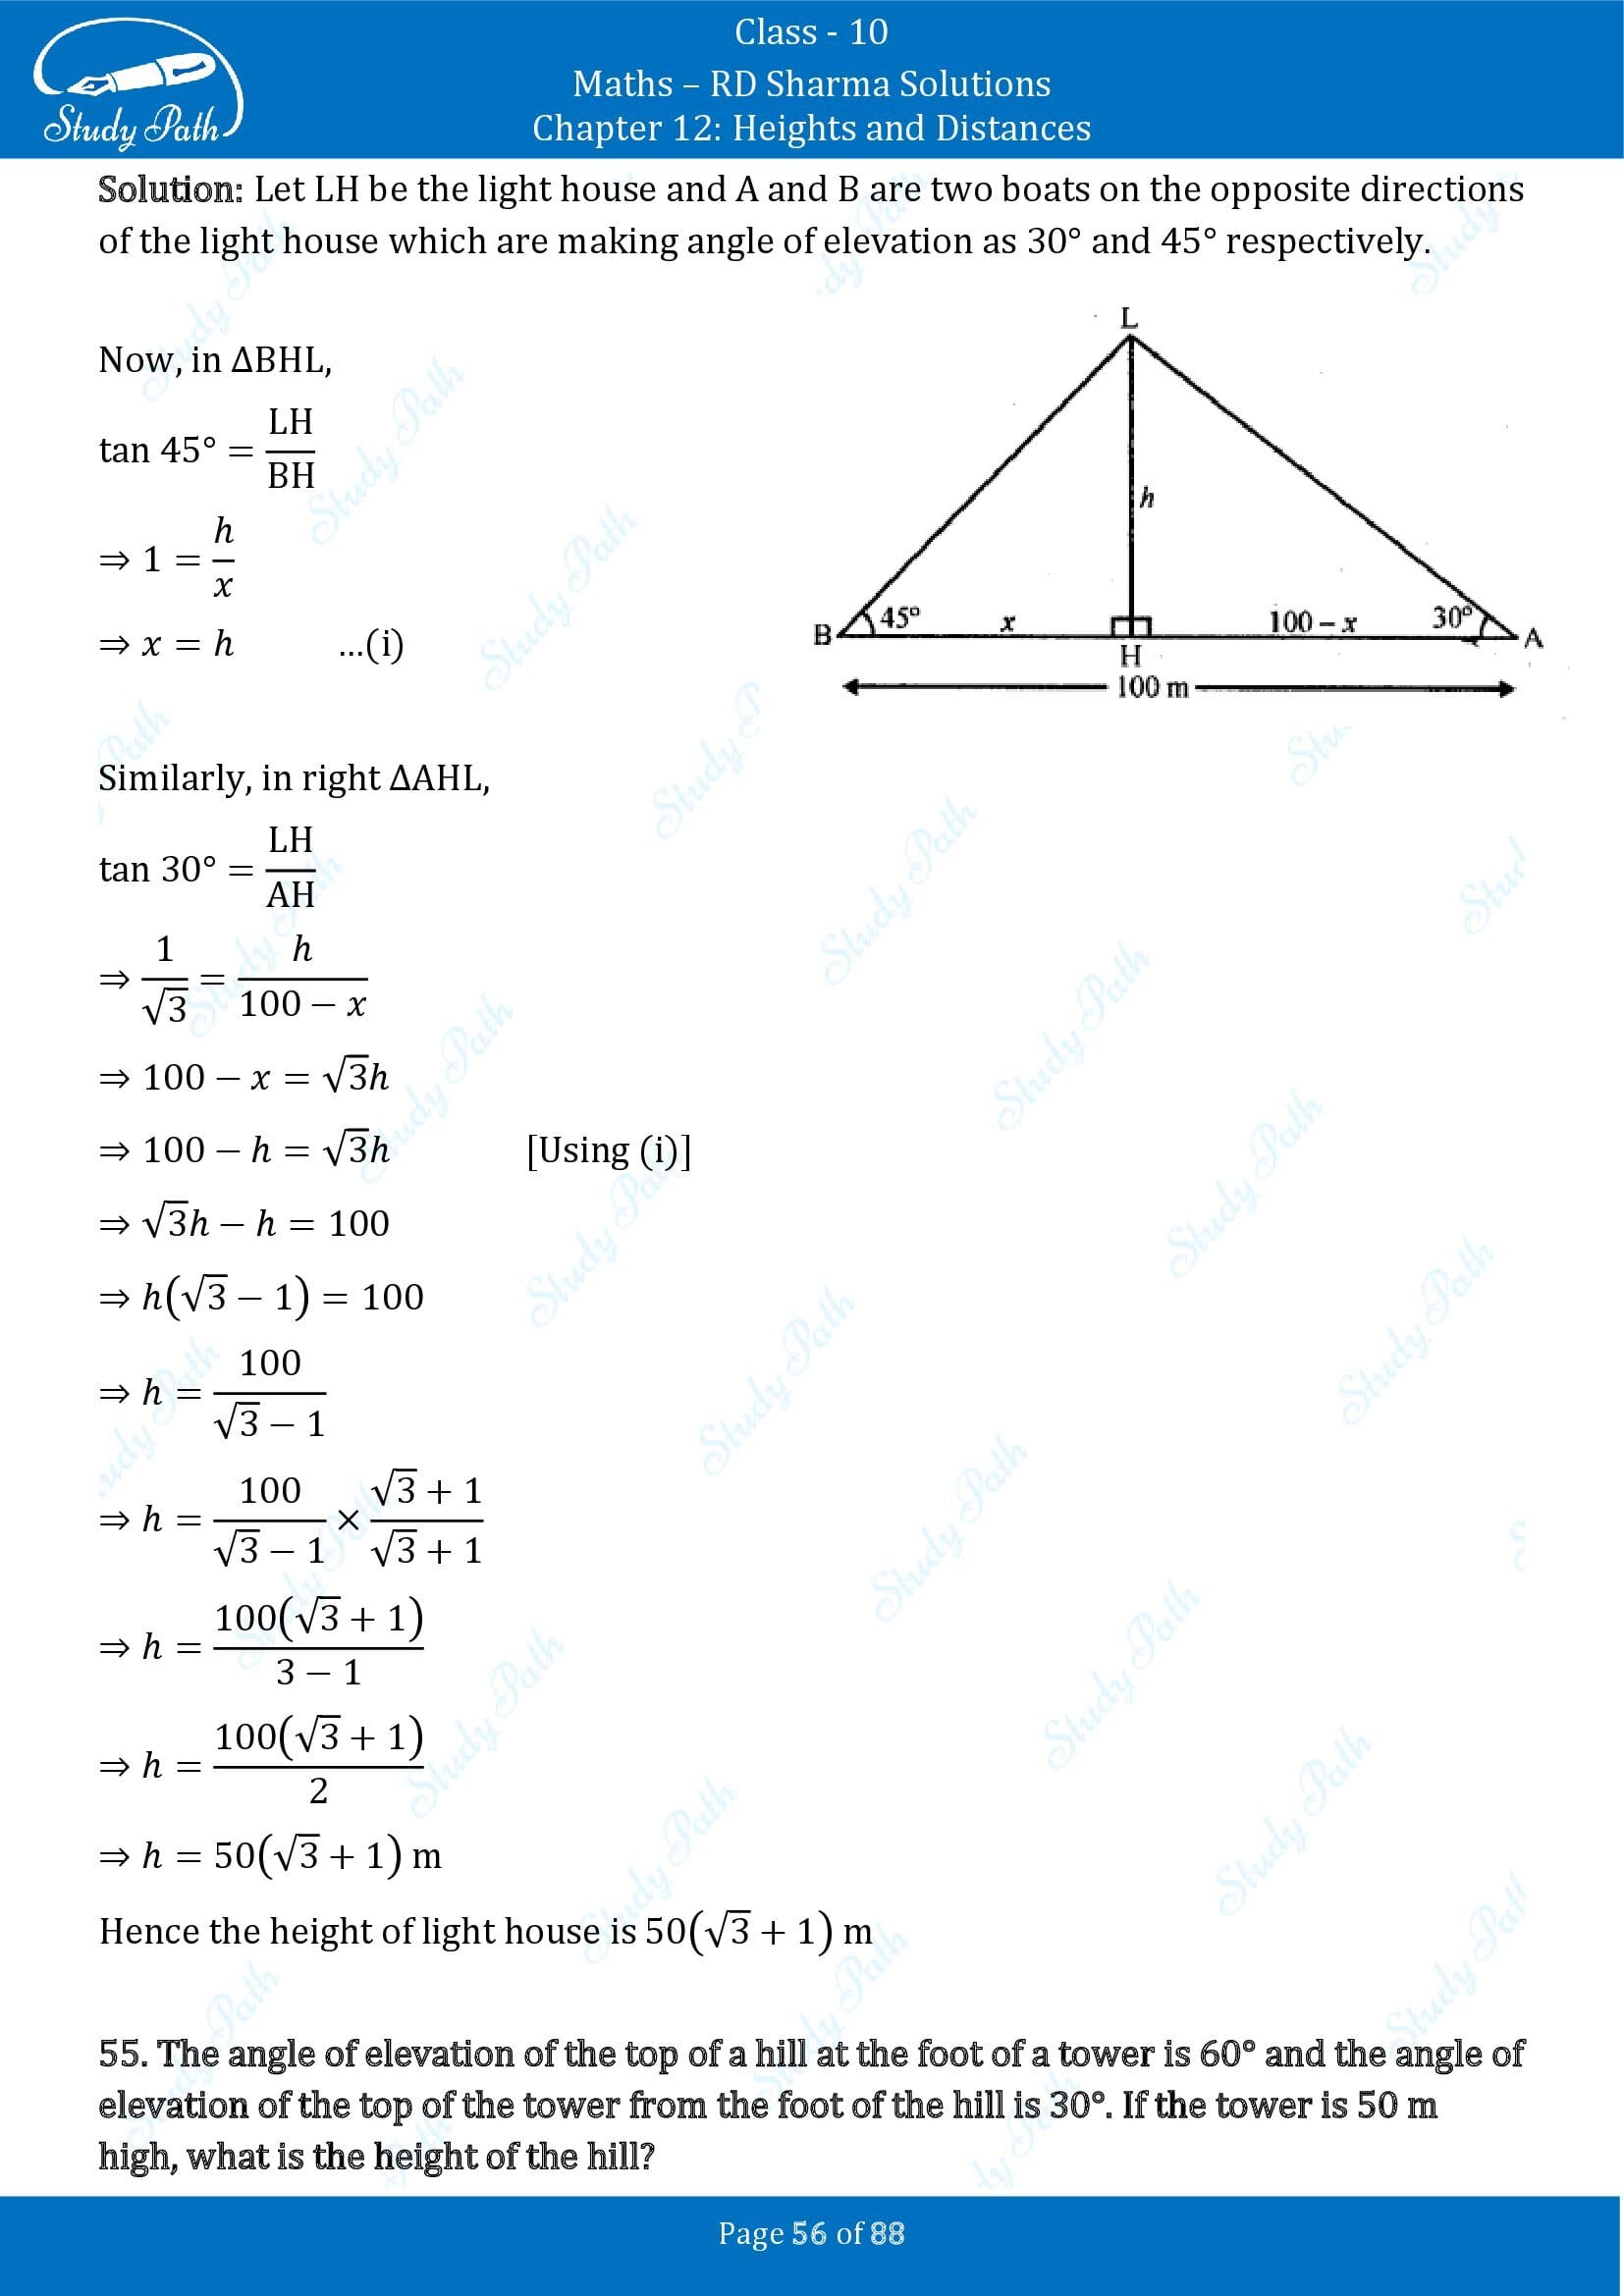 RD Sharma Solutions Class 10 Chapter 12 Heights and Distances Exercise 12.1 00056